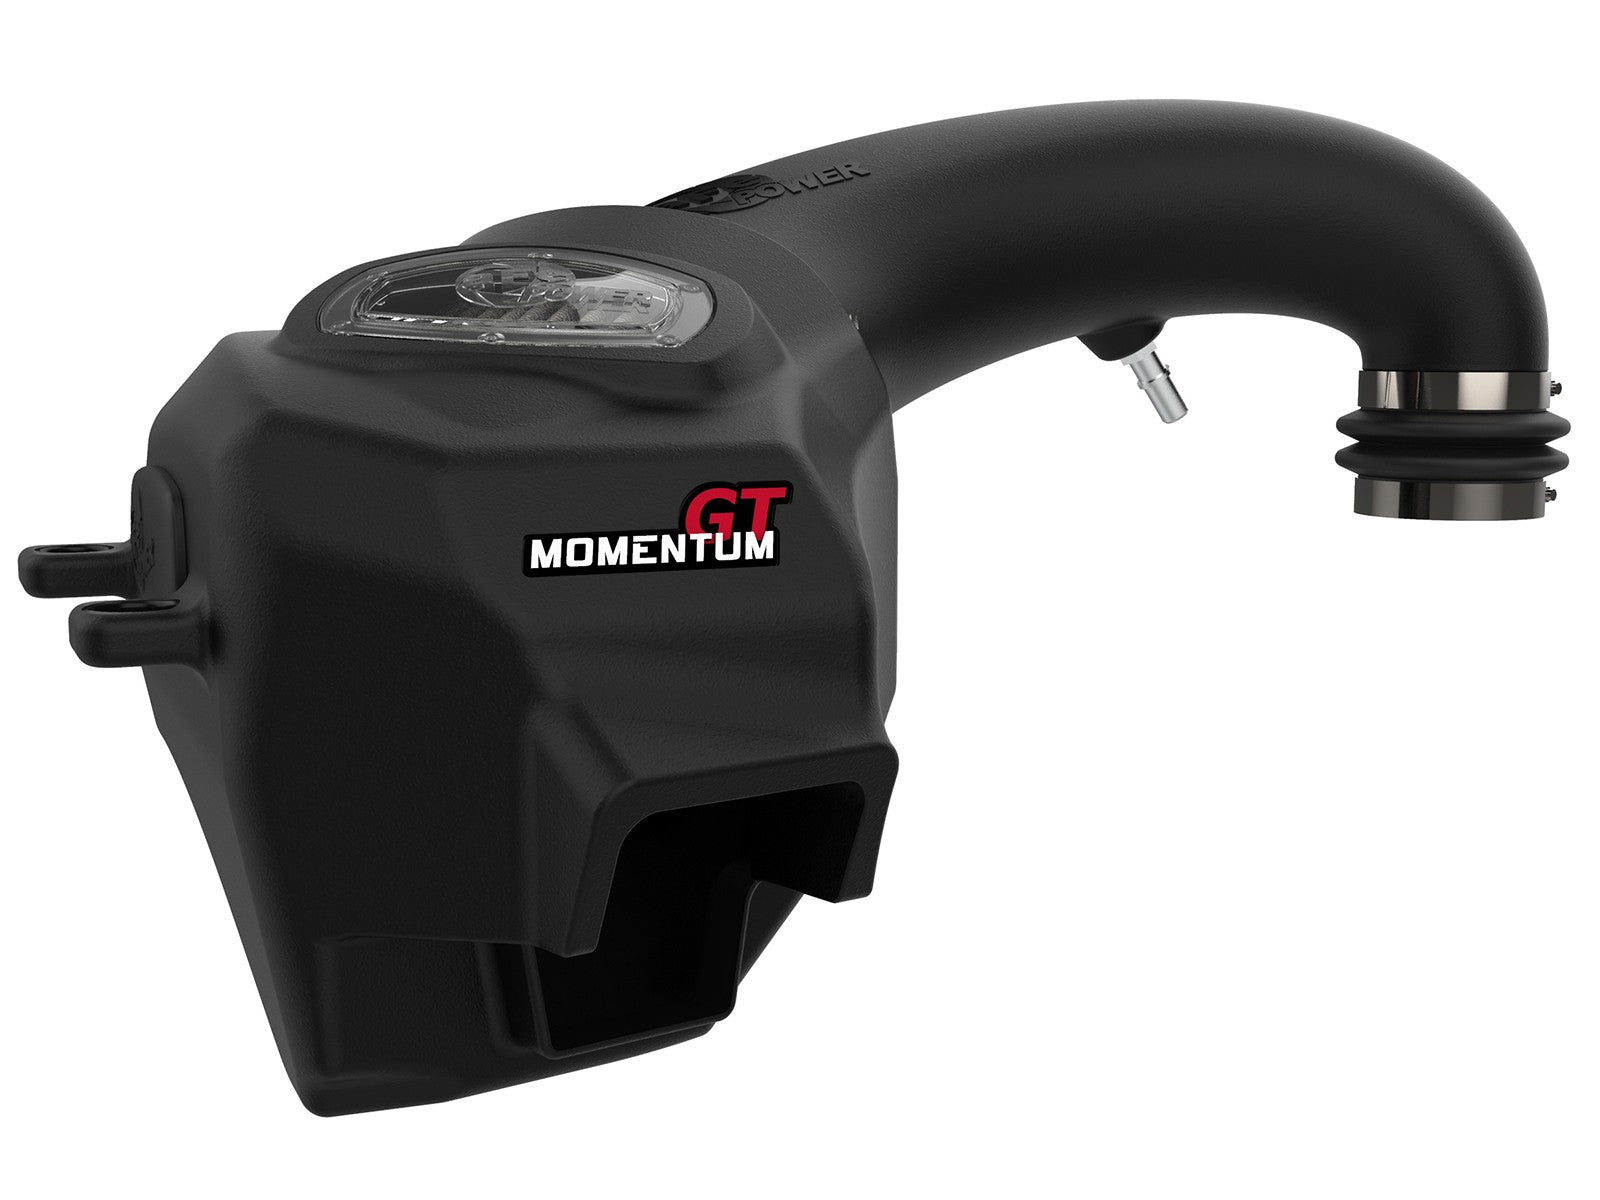 GT MOMENTUM SIDE VIEW